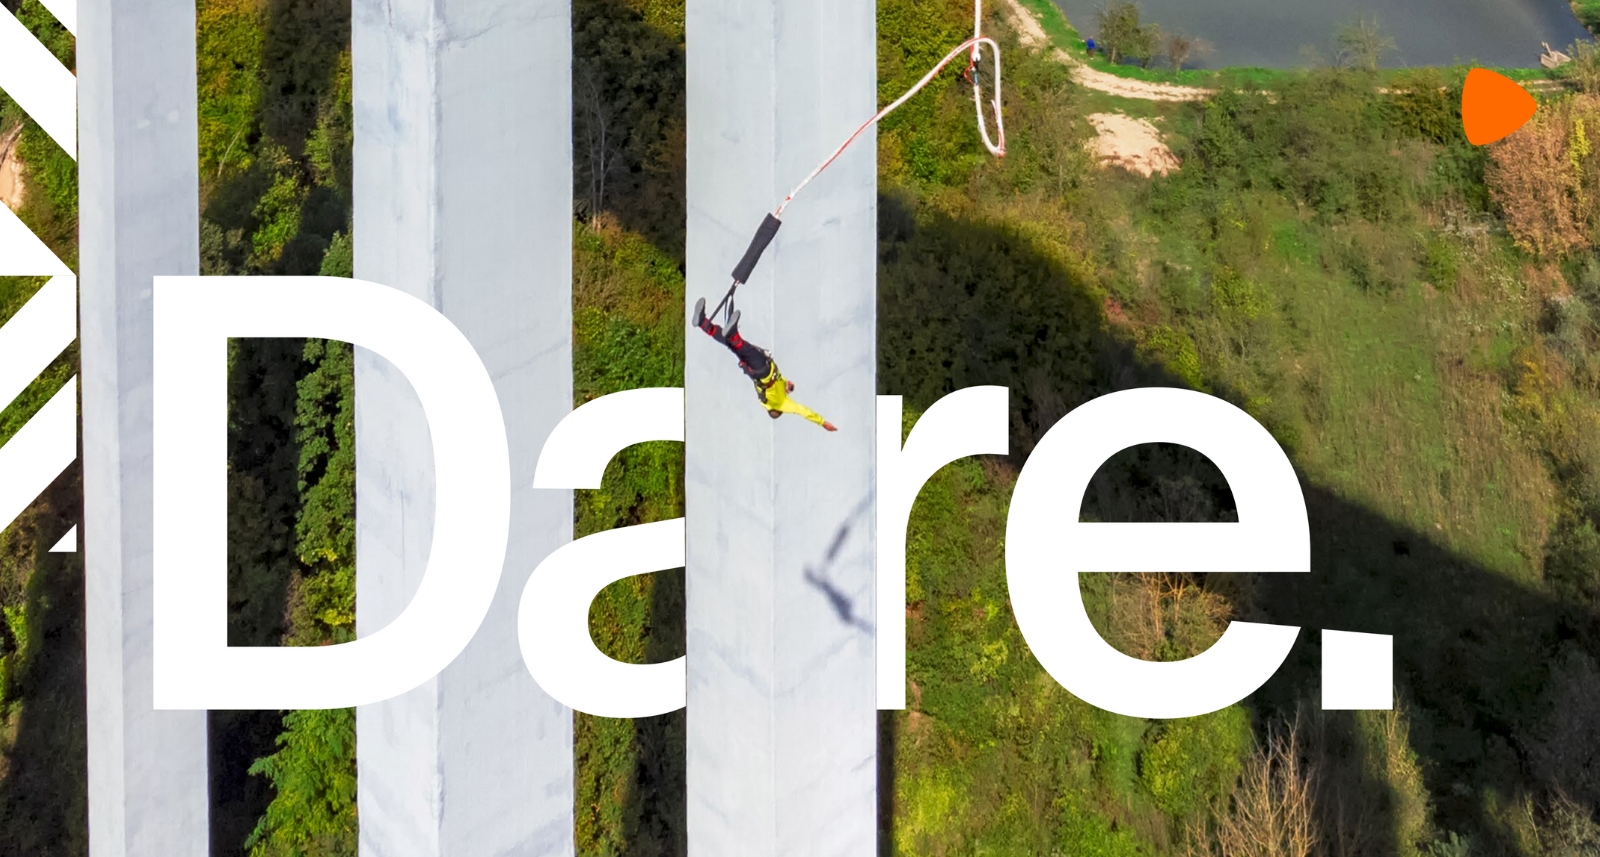 Person bungee jumping off a bridge and the word "Dare." written over image.